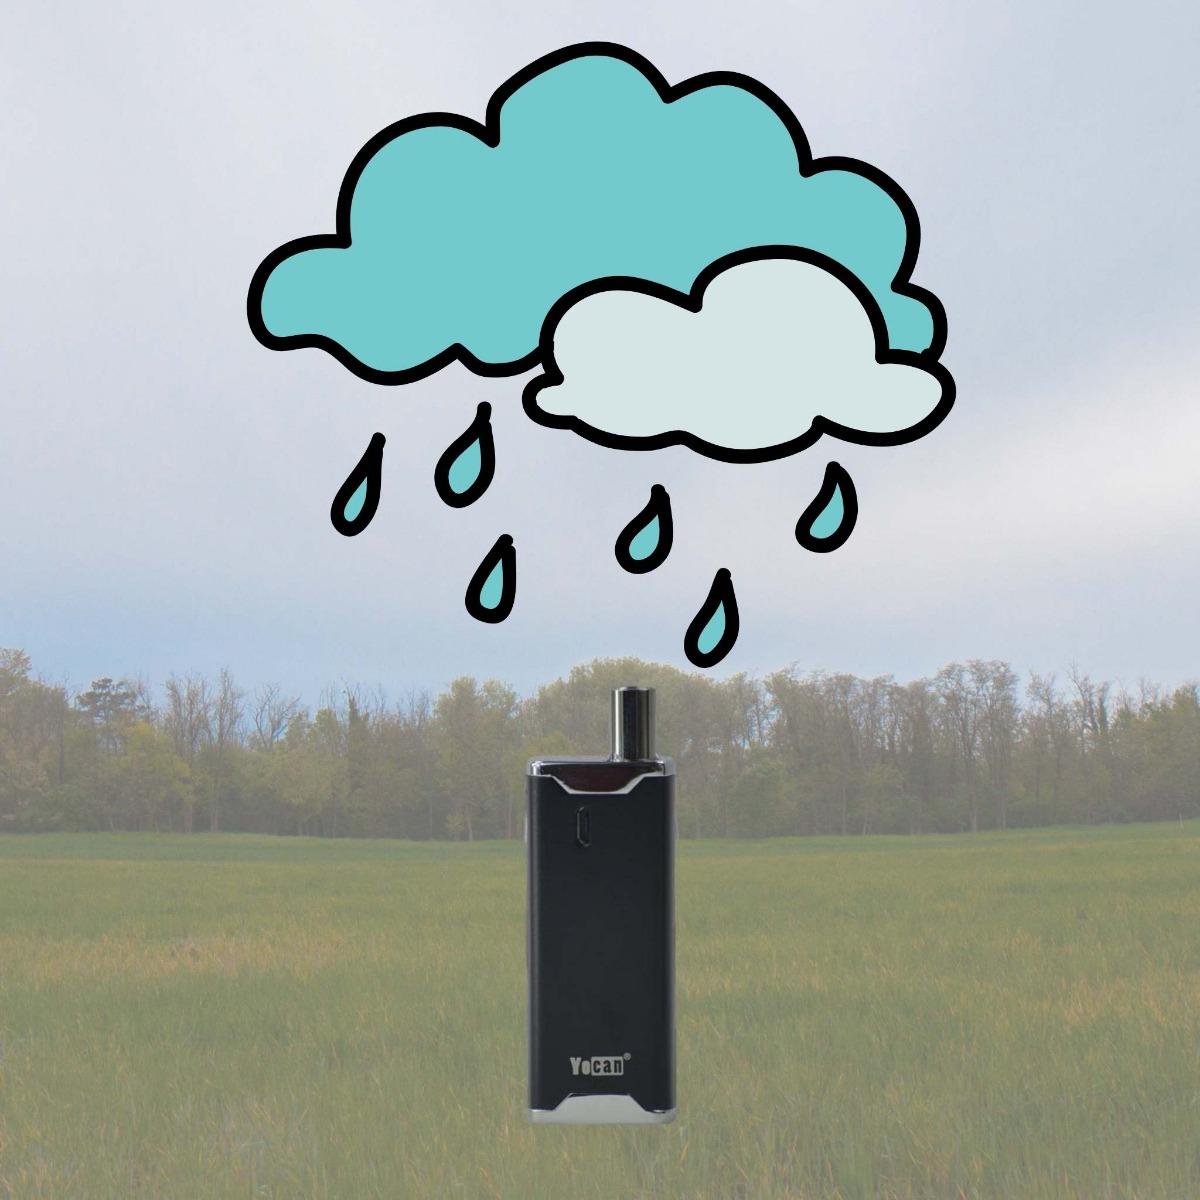 Vaporizer left outside and an animation of rain coming down